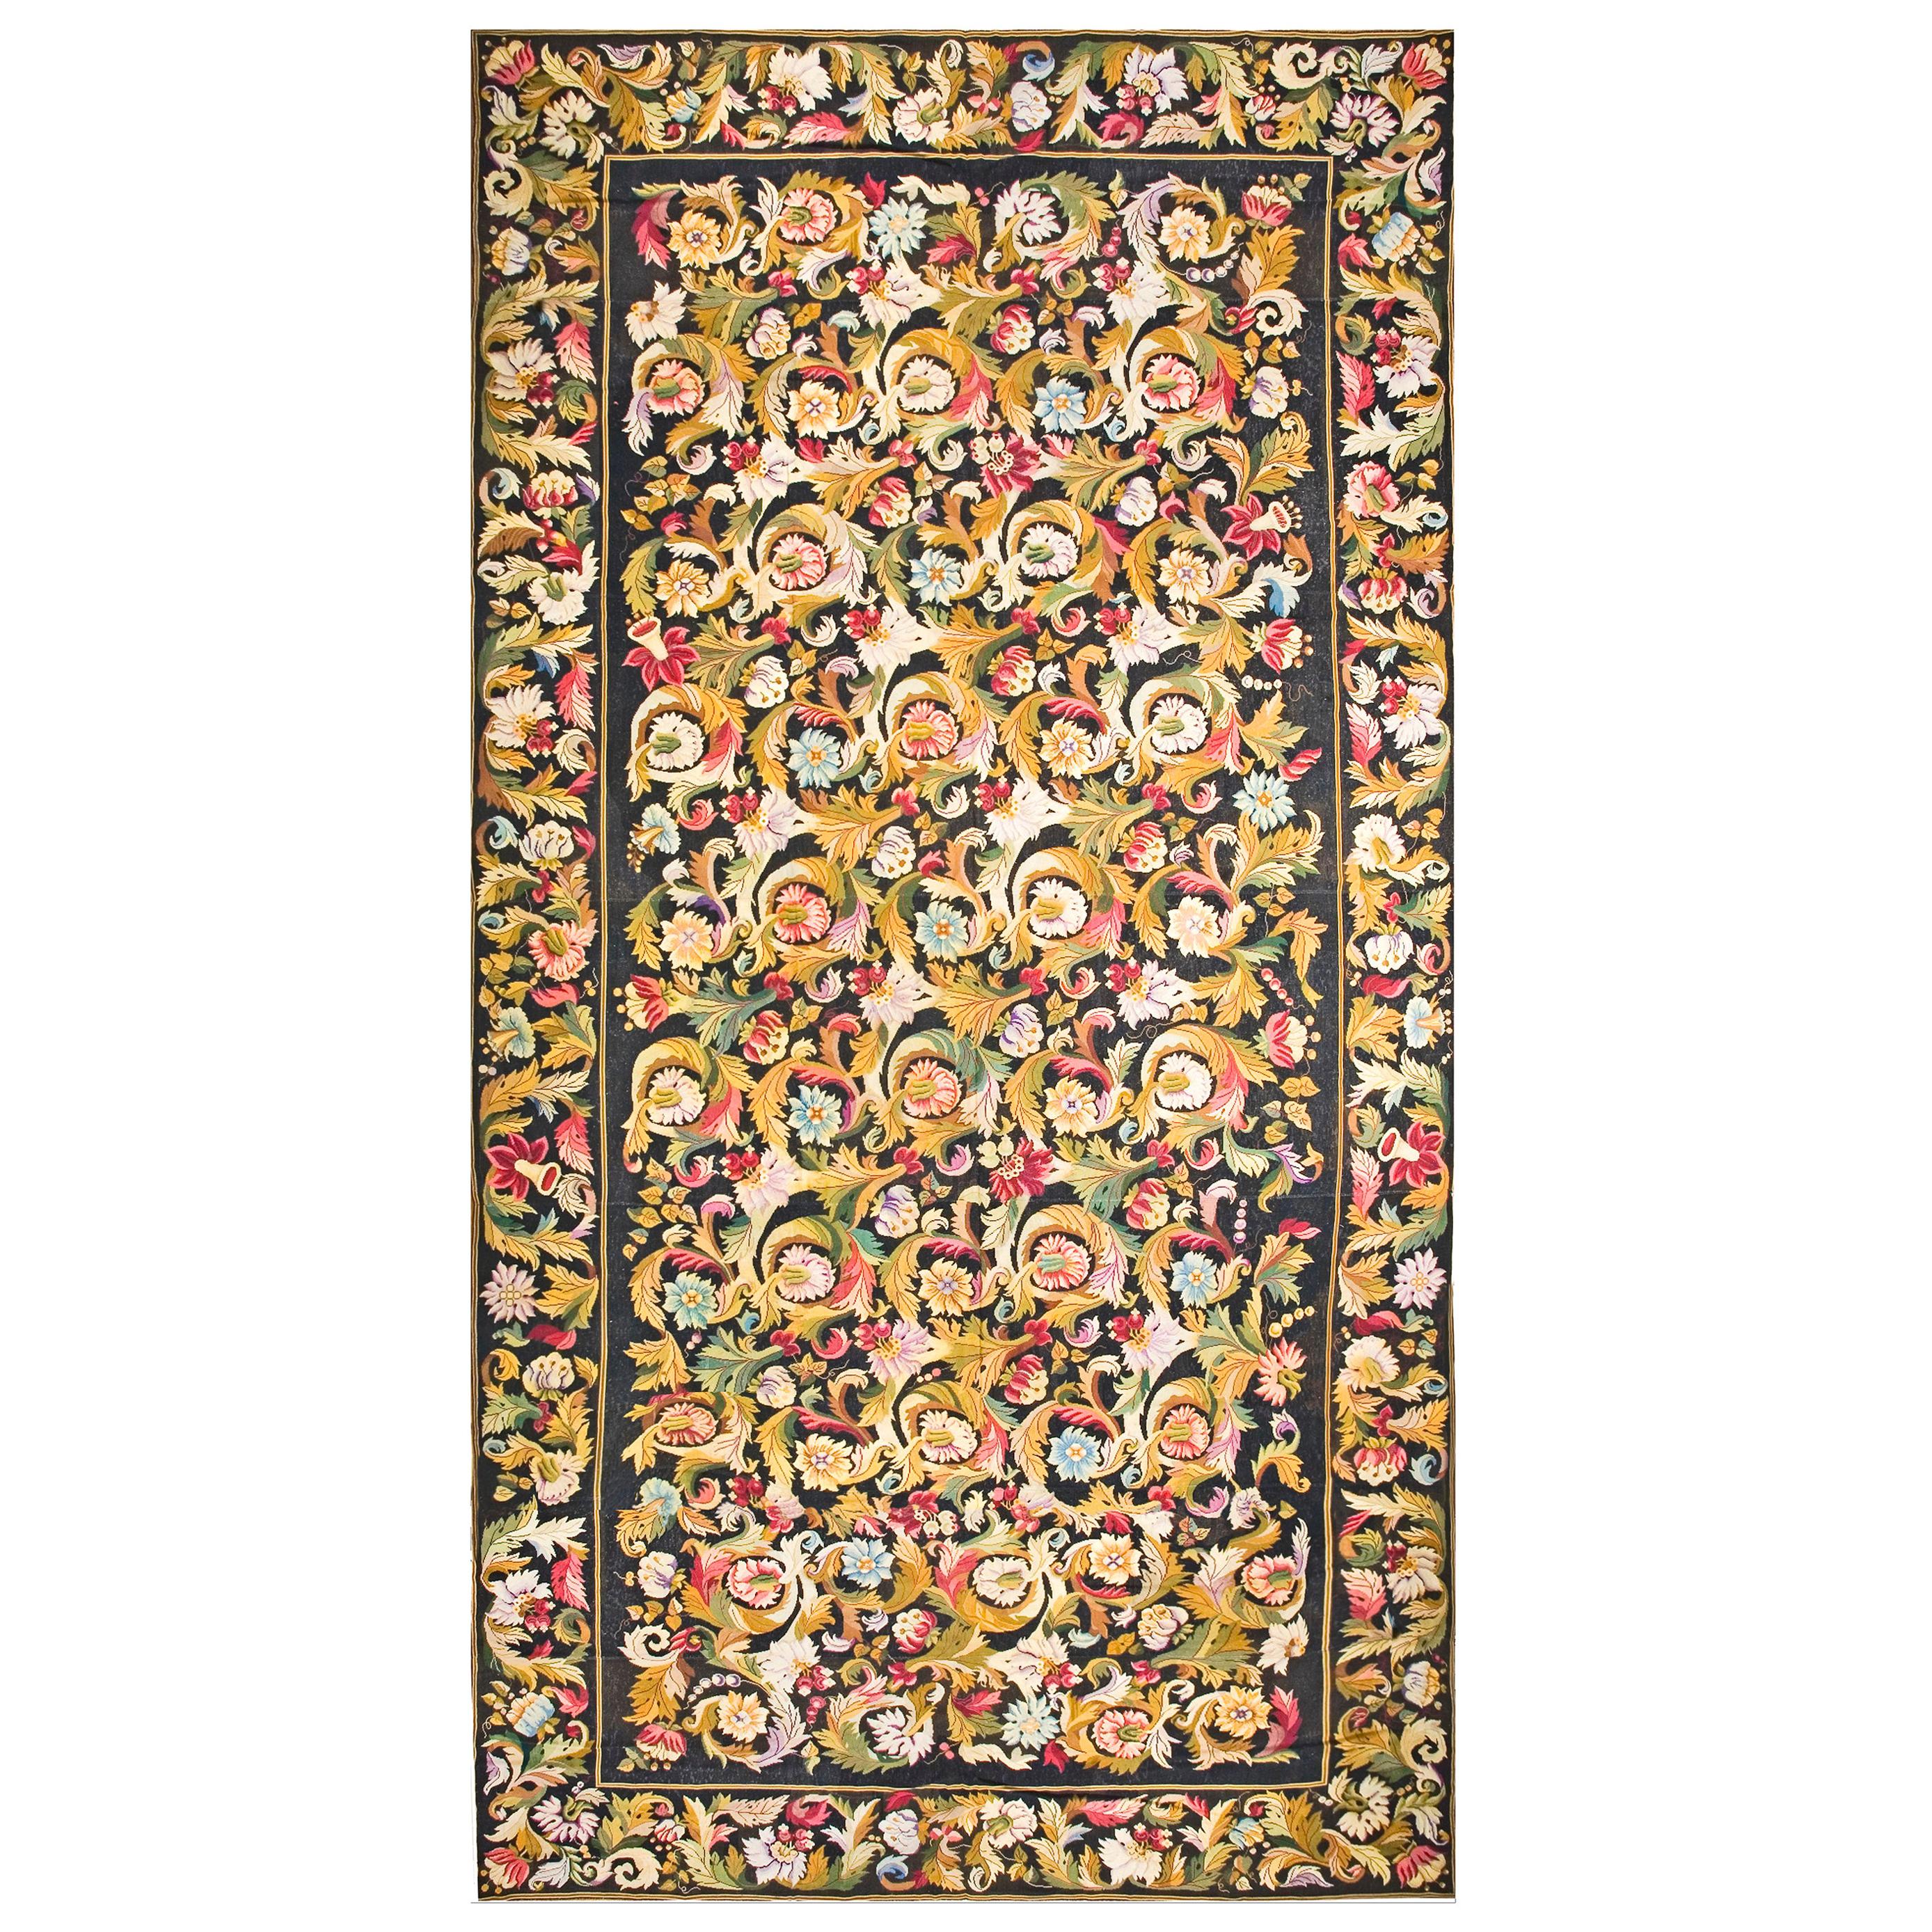 Late 19th Century French Needlepoint Carpet ( 10'6" X 24'9" - 320 x 754 ) For Sale